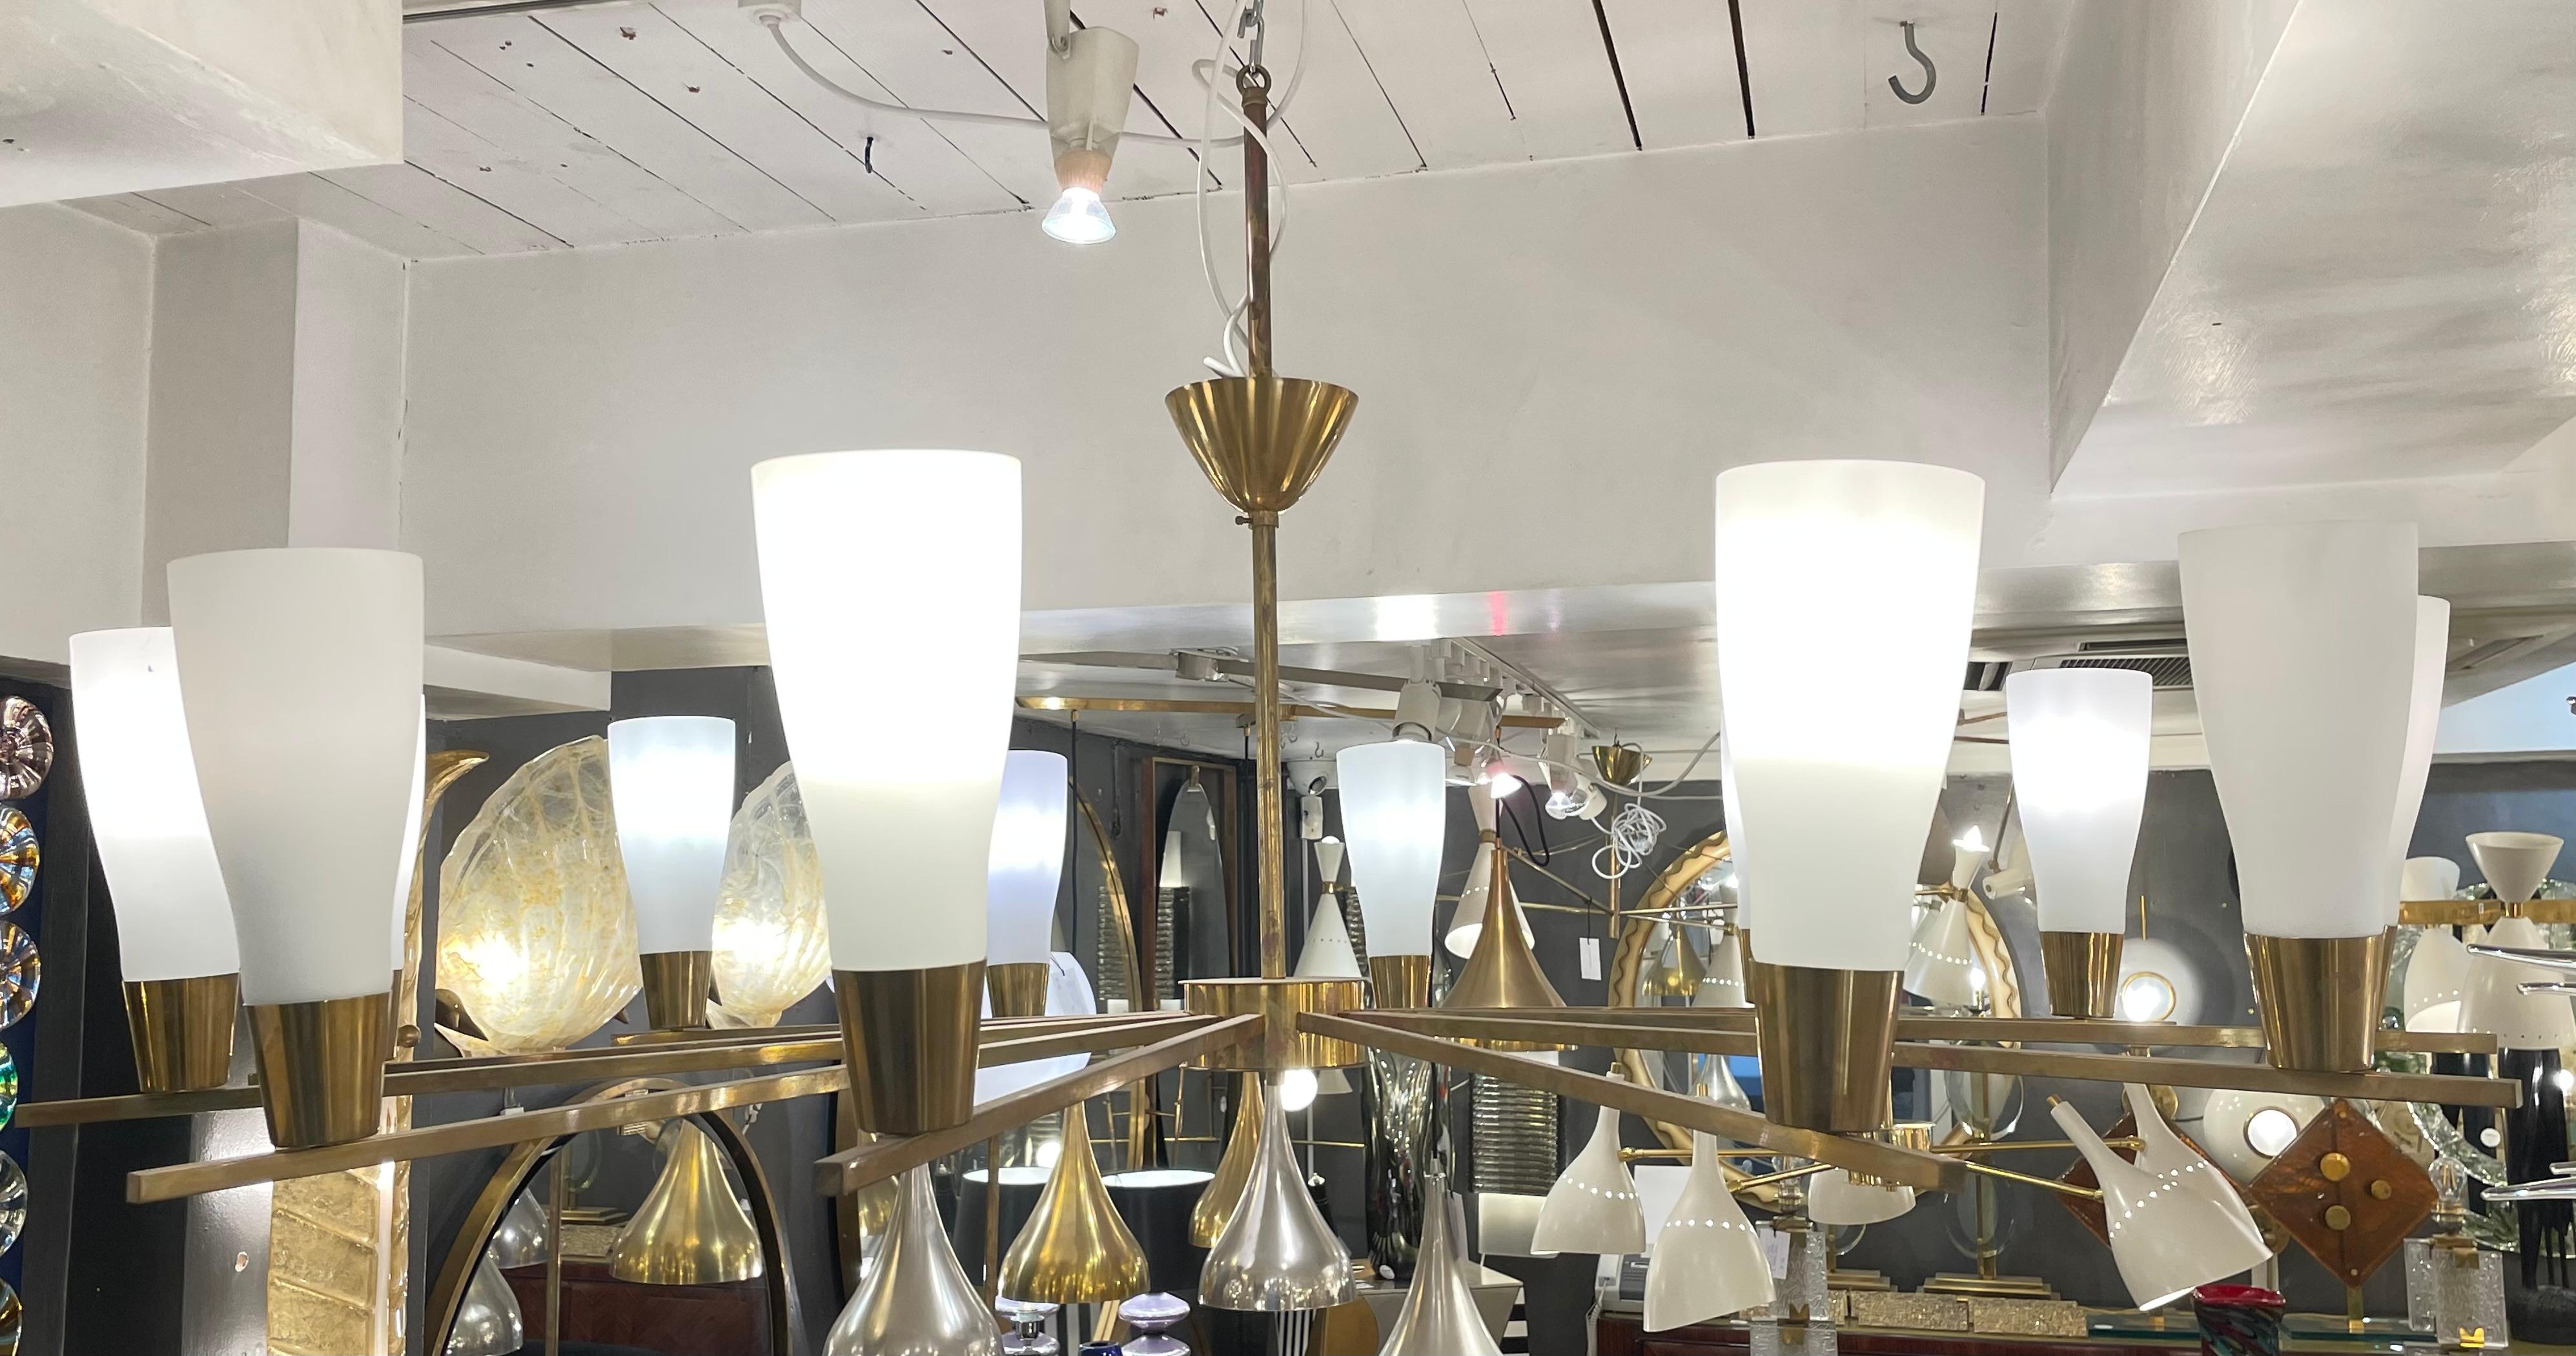 A fantastic pair of Italian Modernist Design Chandeliers in brass with 12 arms with white frosted glass shades, circa 1960.